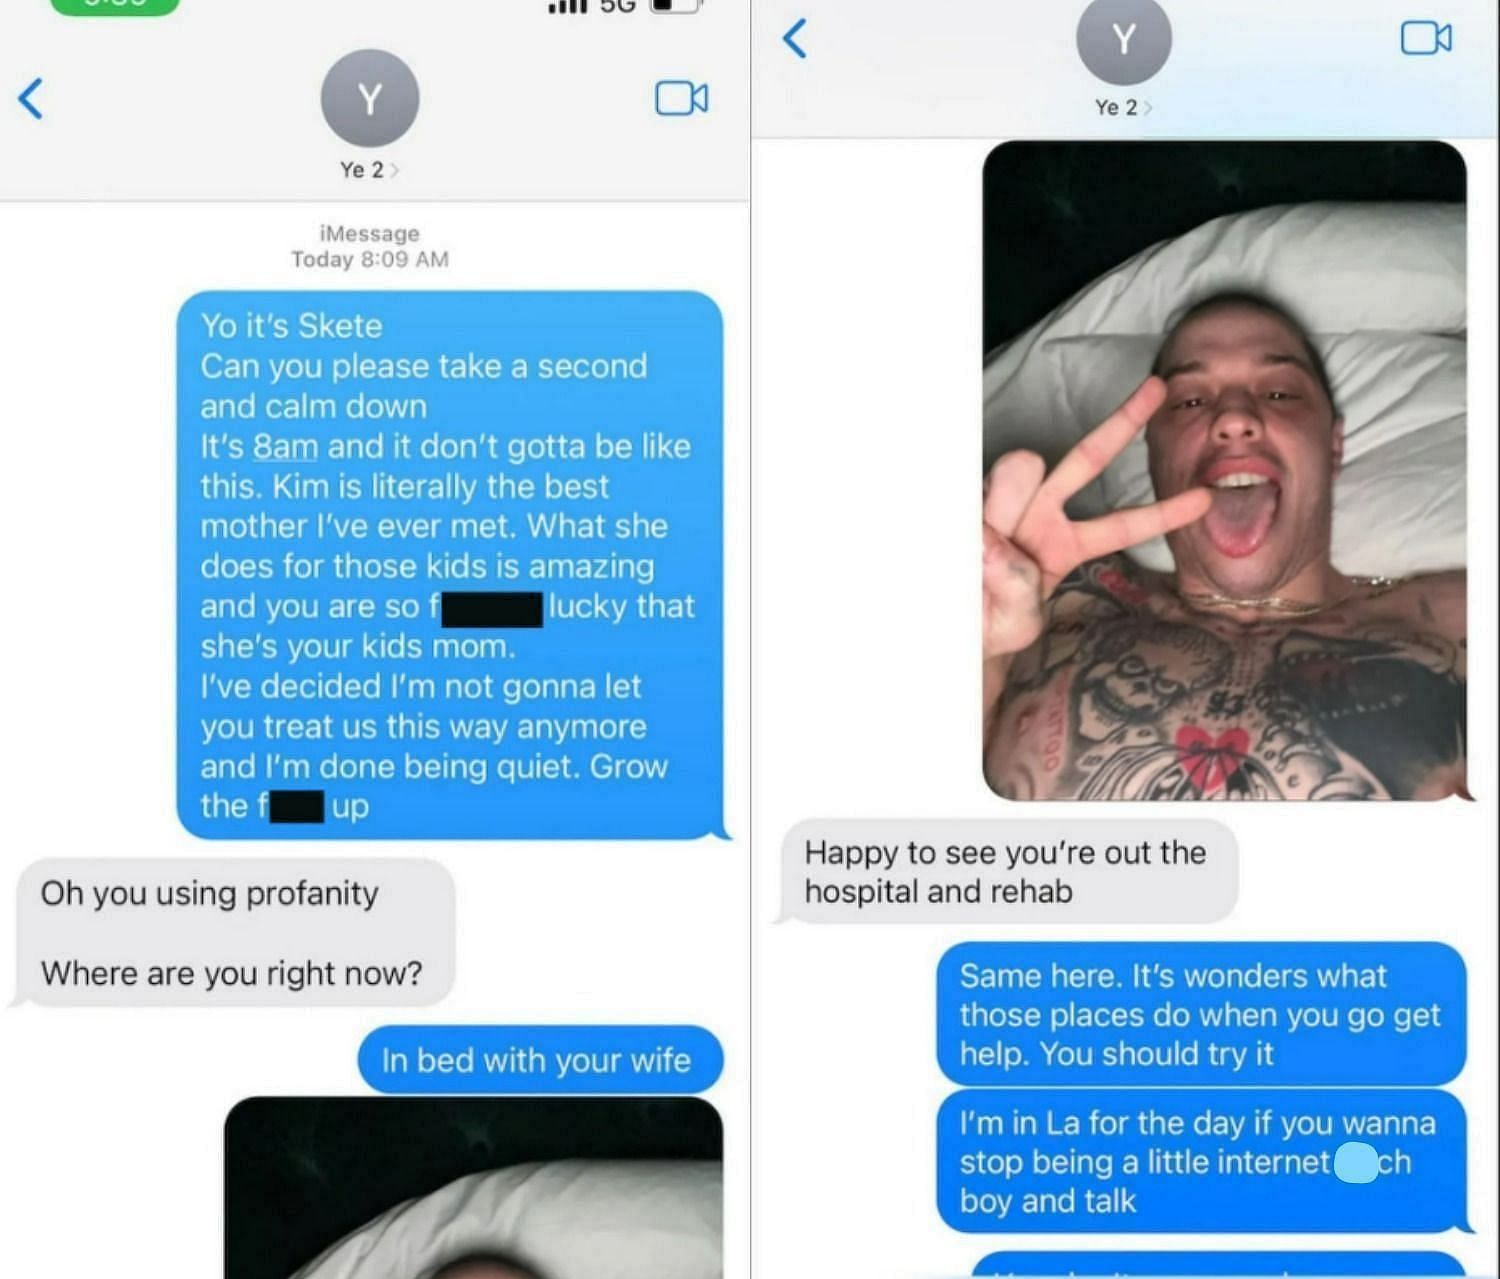 Text messages exchanged between Kanye West and Pete Davidson 1/3 (Image via Dave Sirus/Instagram)